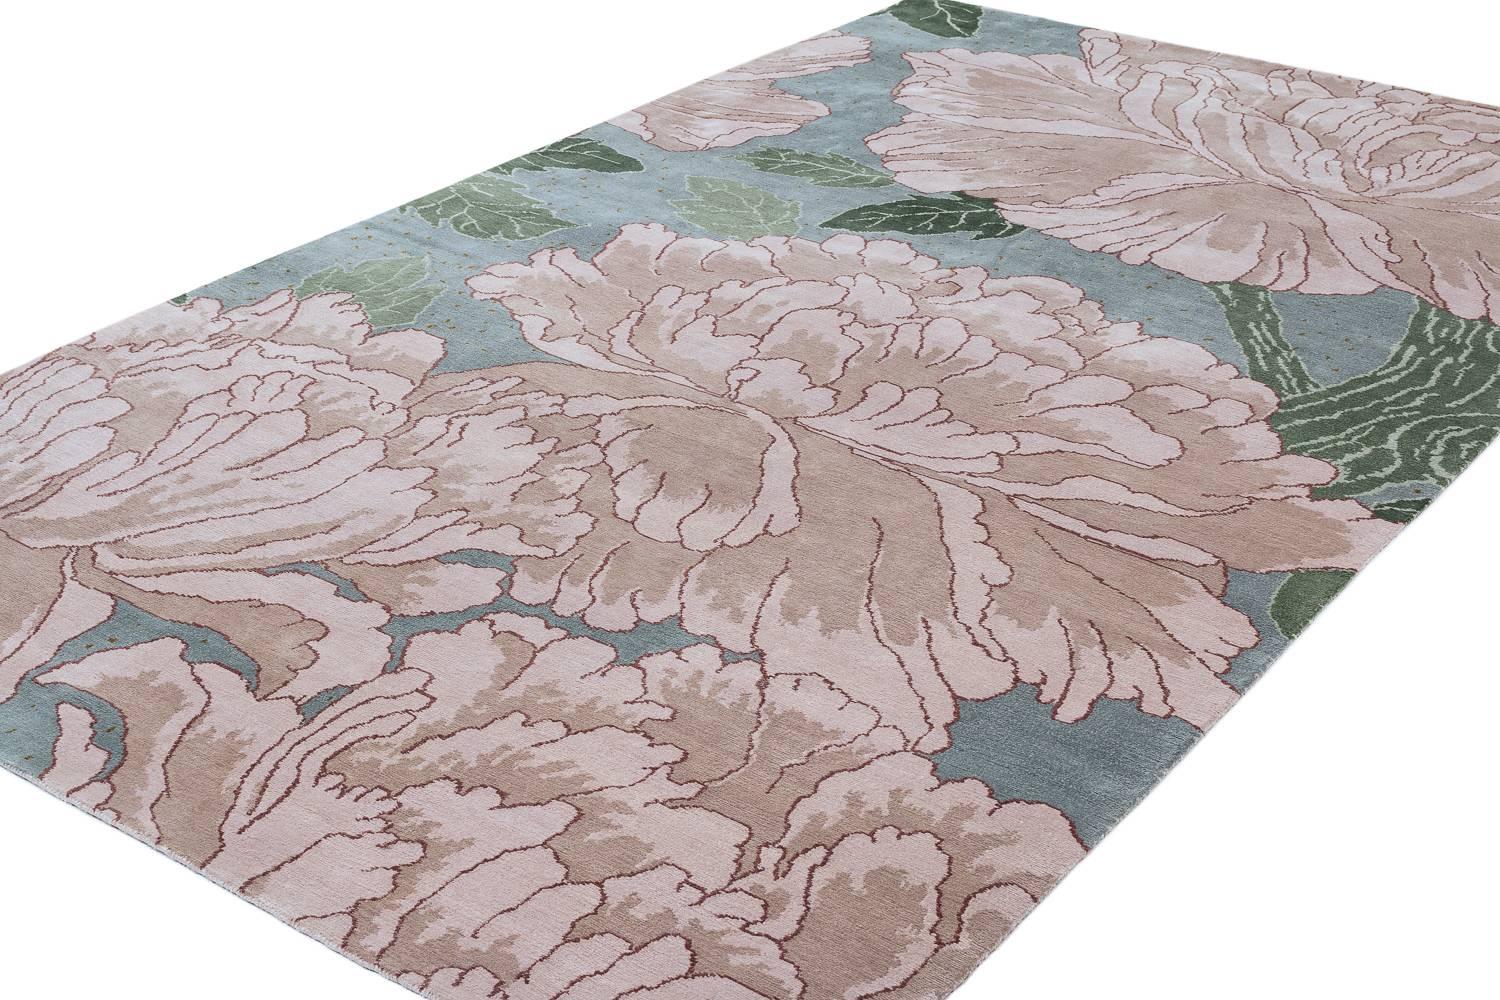 This version of the Mums design is subtle in rosy greys, blue, leafy green, and silver. The outlined petals, solid background and leaf detail makes this carpet a floral staple in any home. Original design by Joseph Carini.

All designs offered in